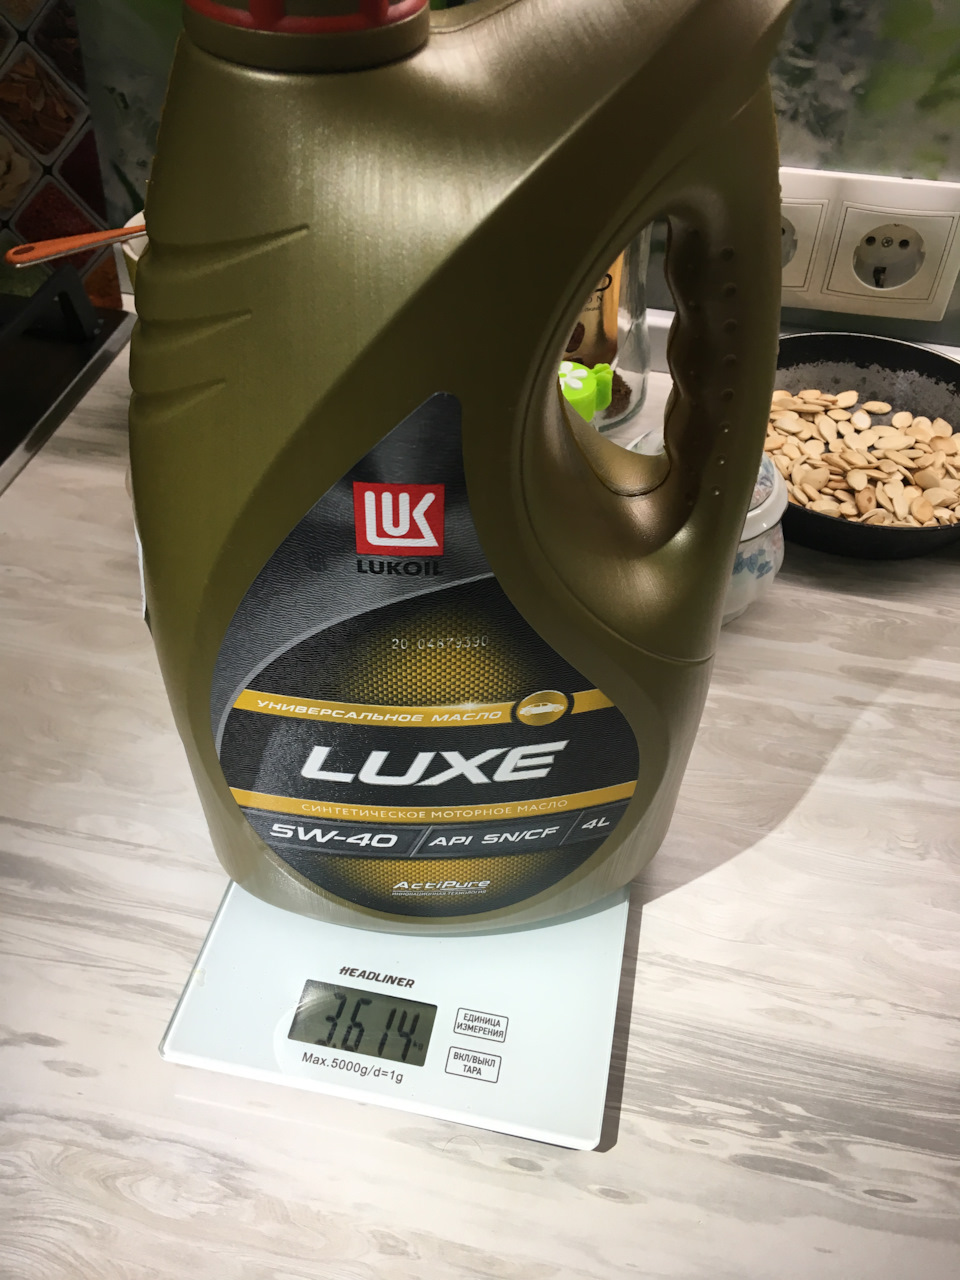 Масло лукойл 5w40 sn cf. Масло Лукойл SN CF 5w40. Lukoil Luxe 5w-40. Лукойл Люкс 5w40 SN/CF. Лукойл Люкс 5w30 ACEA.